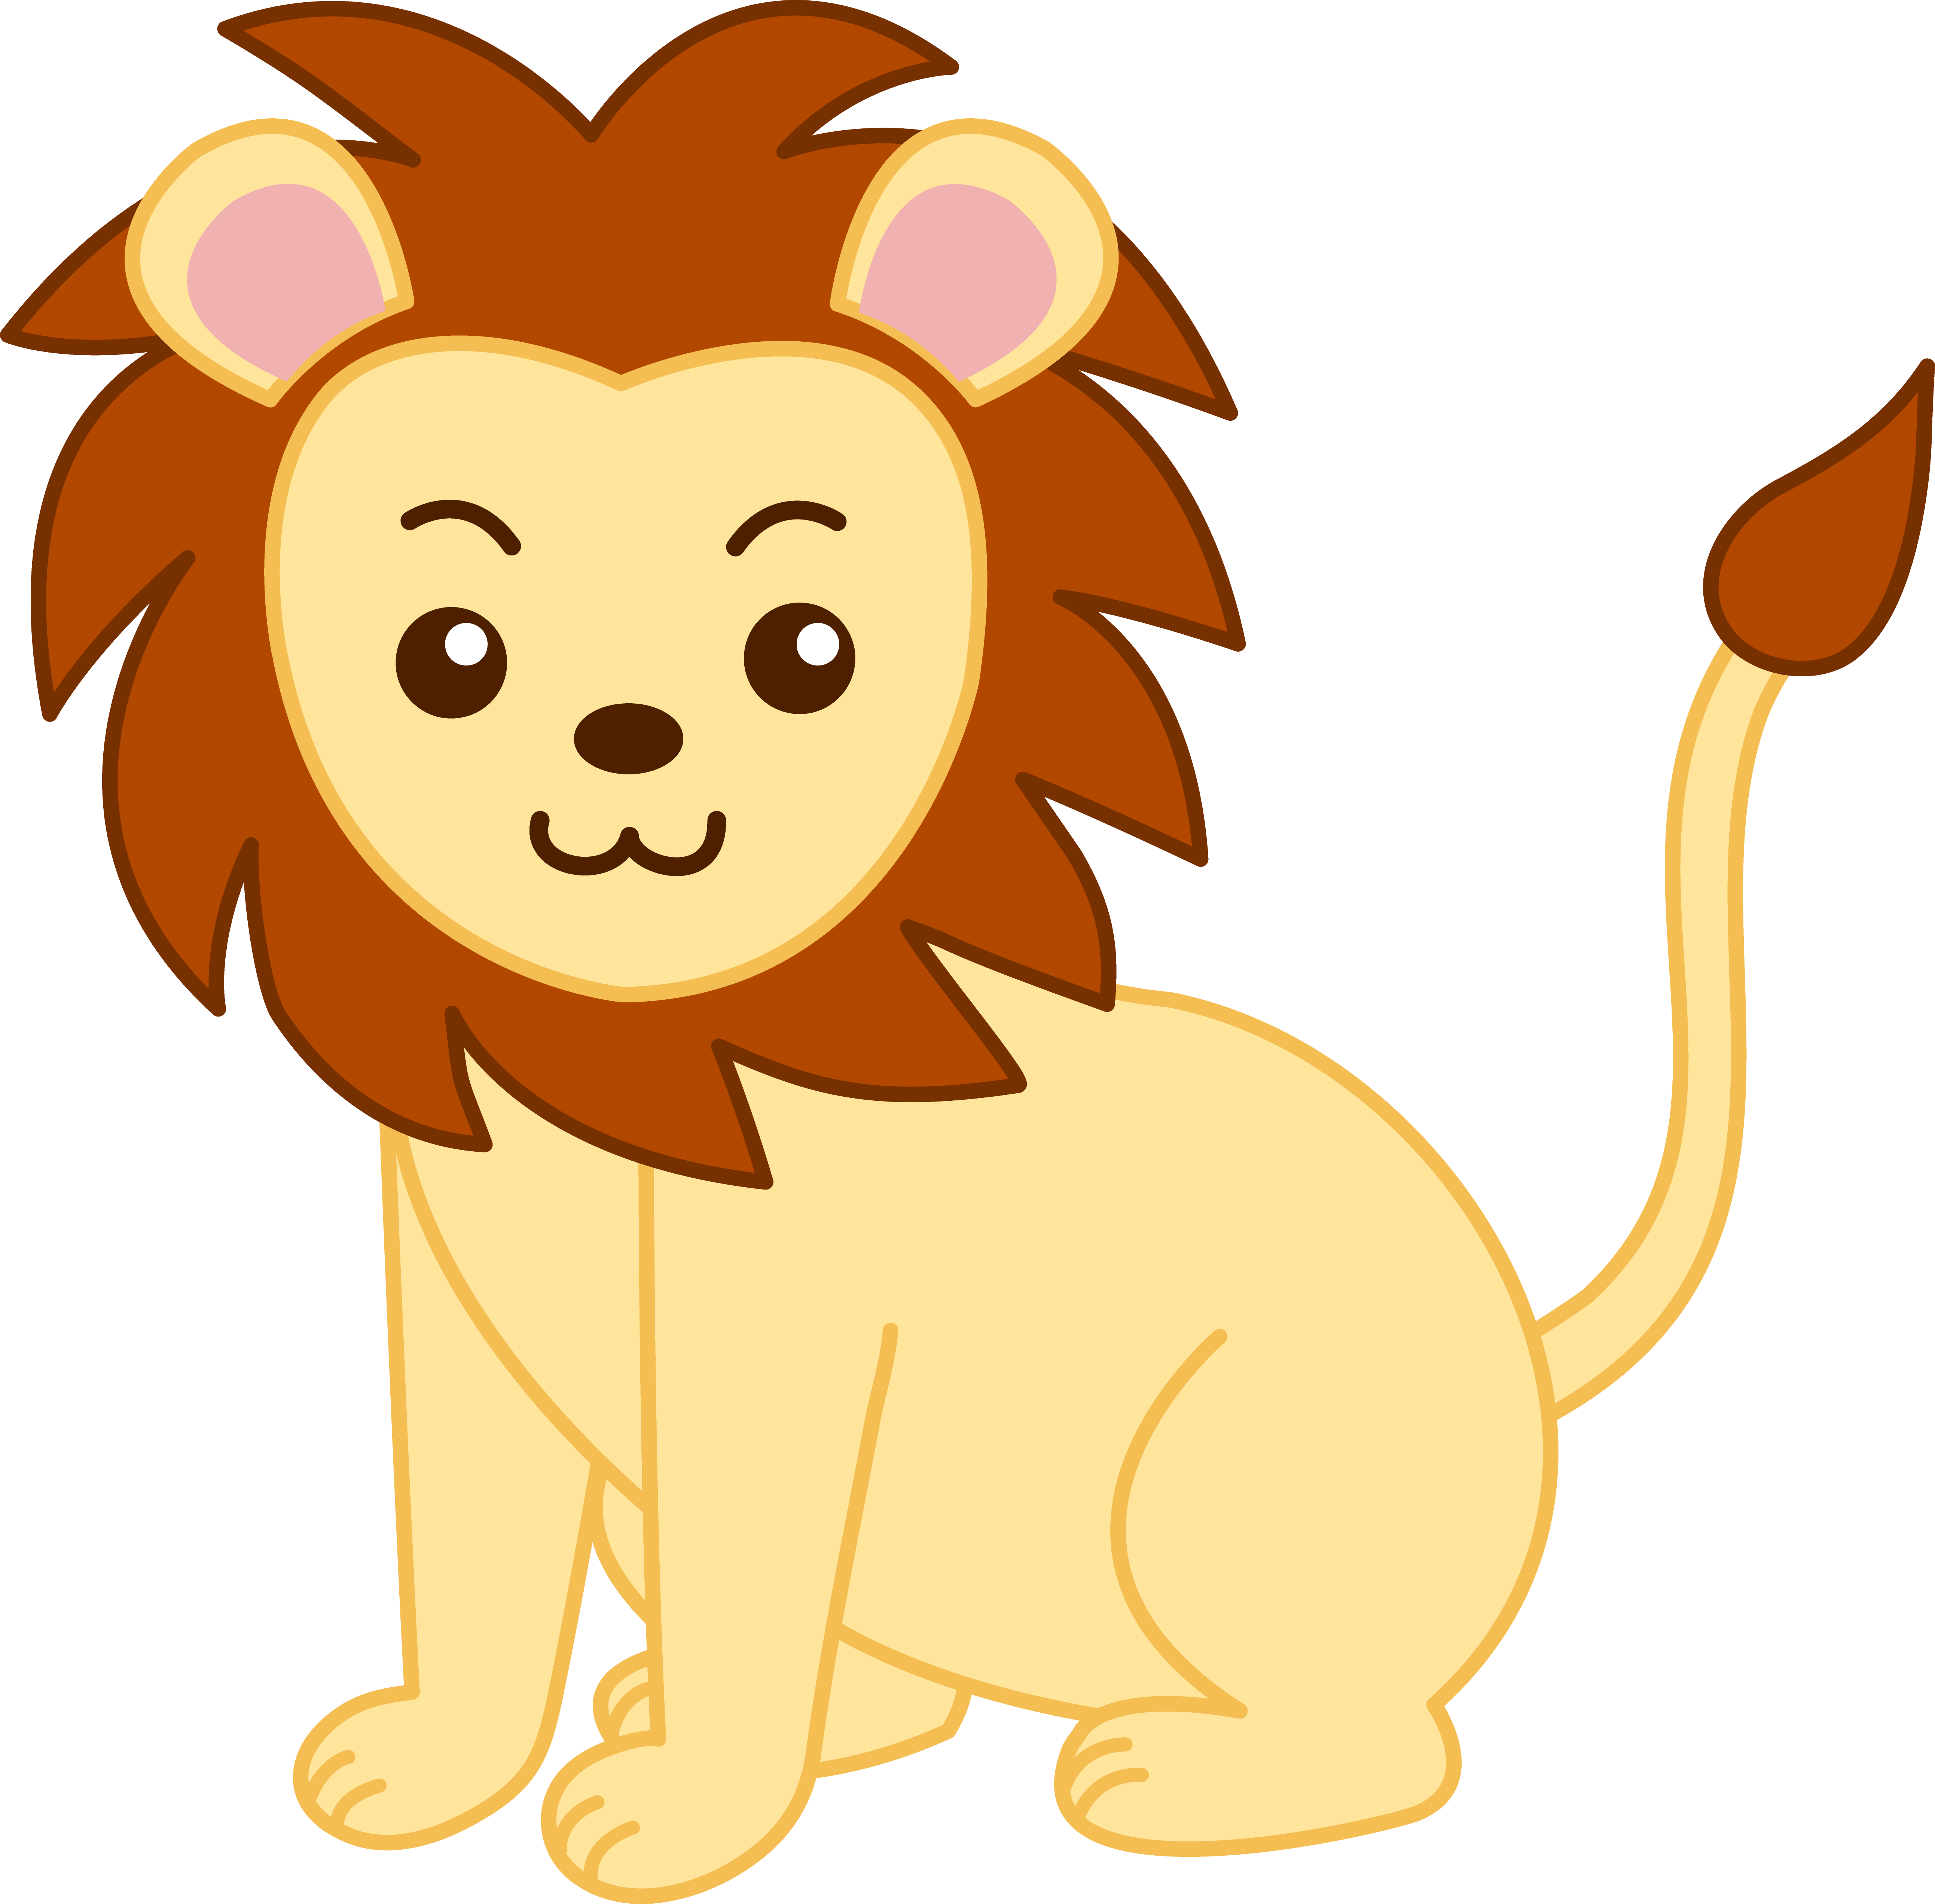 Baby Lion Clipart - Cute and Adorable Lion Images for Kids